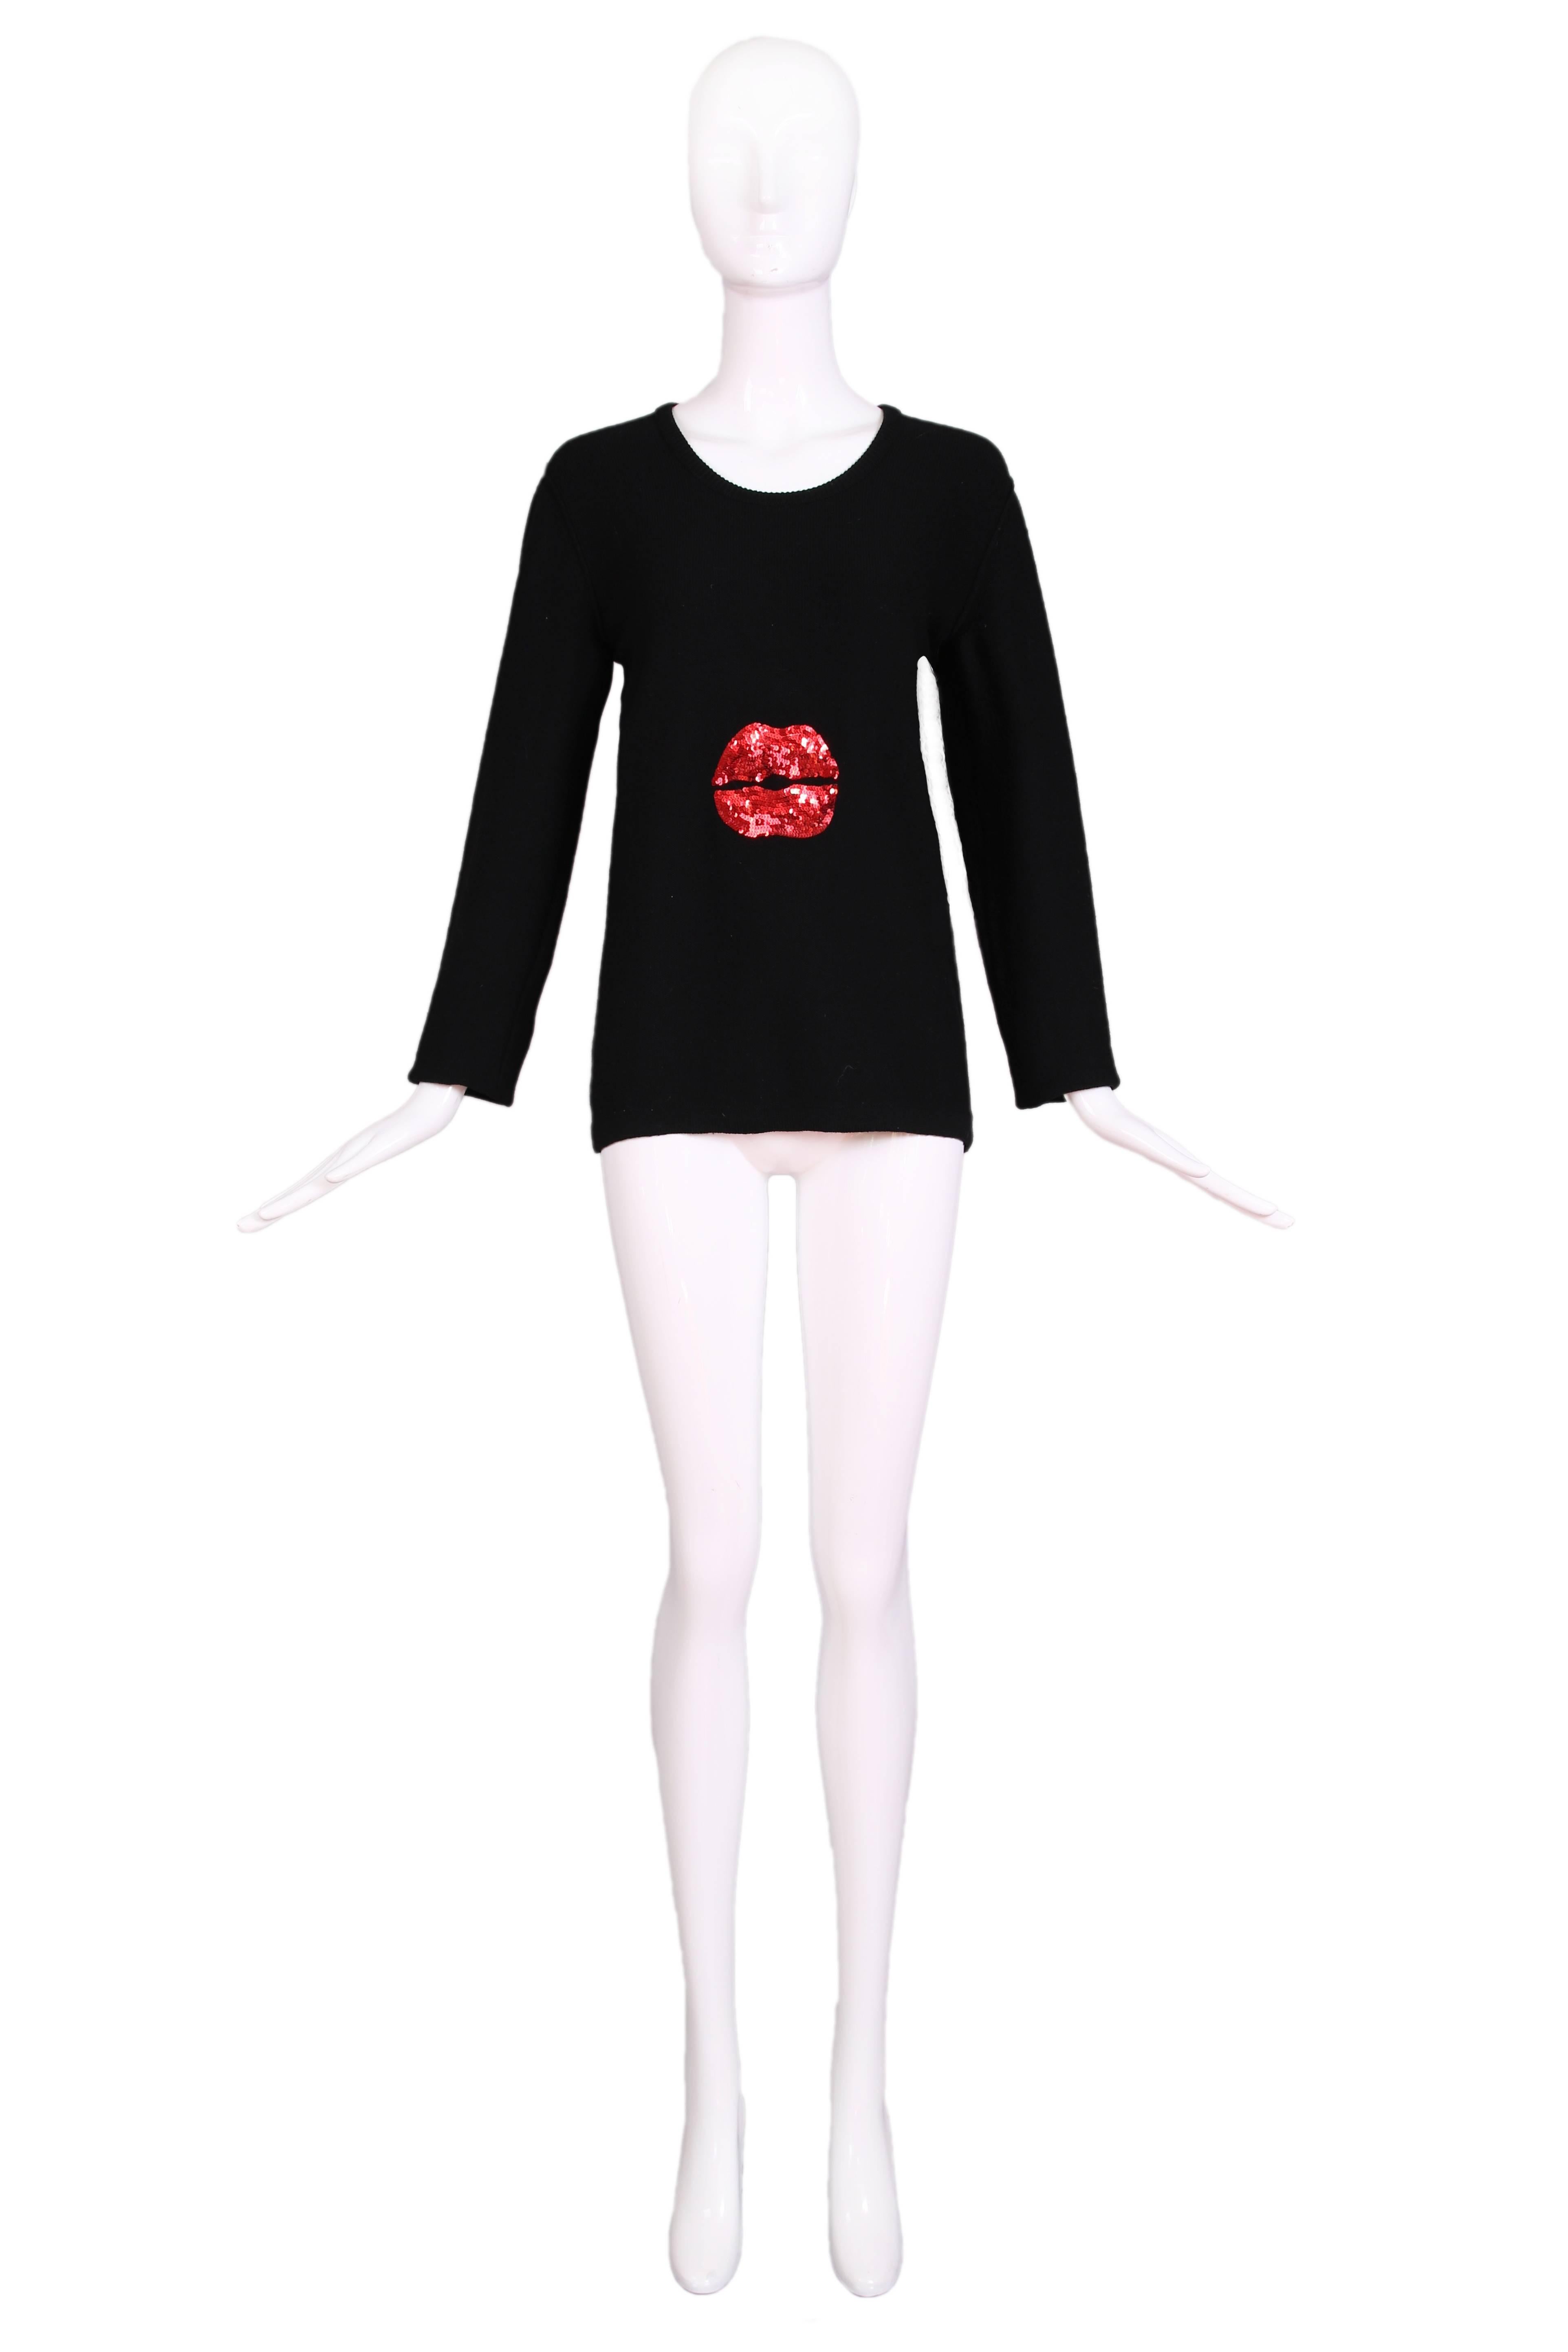 Vintage Sonia Rykiel black scoop neck sweater with long sleeves and an appliqué of red sequin lips as the frontal design element. The sweater is 90% wool and 10% cashmere. Size tag 40. In excellent condition. 
MEASUREMENTS:
Bust - 34